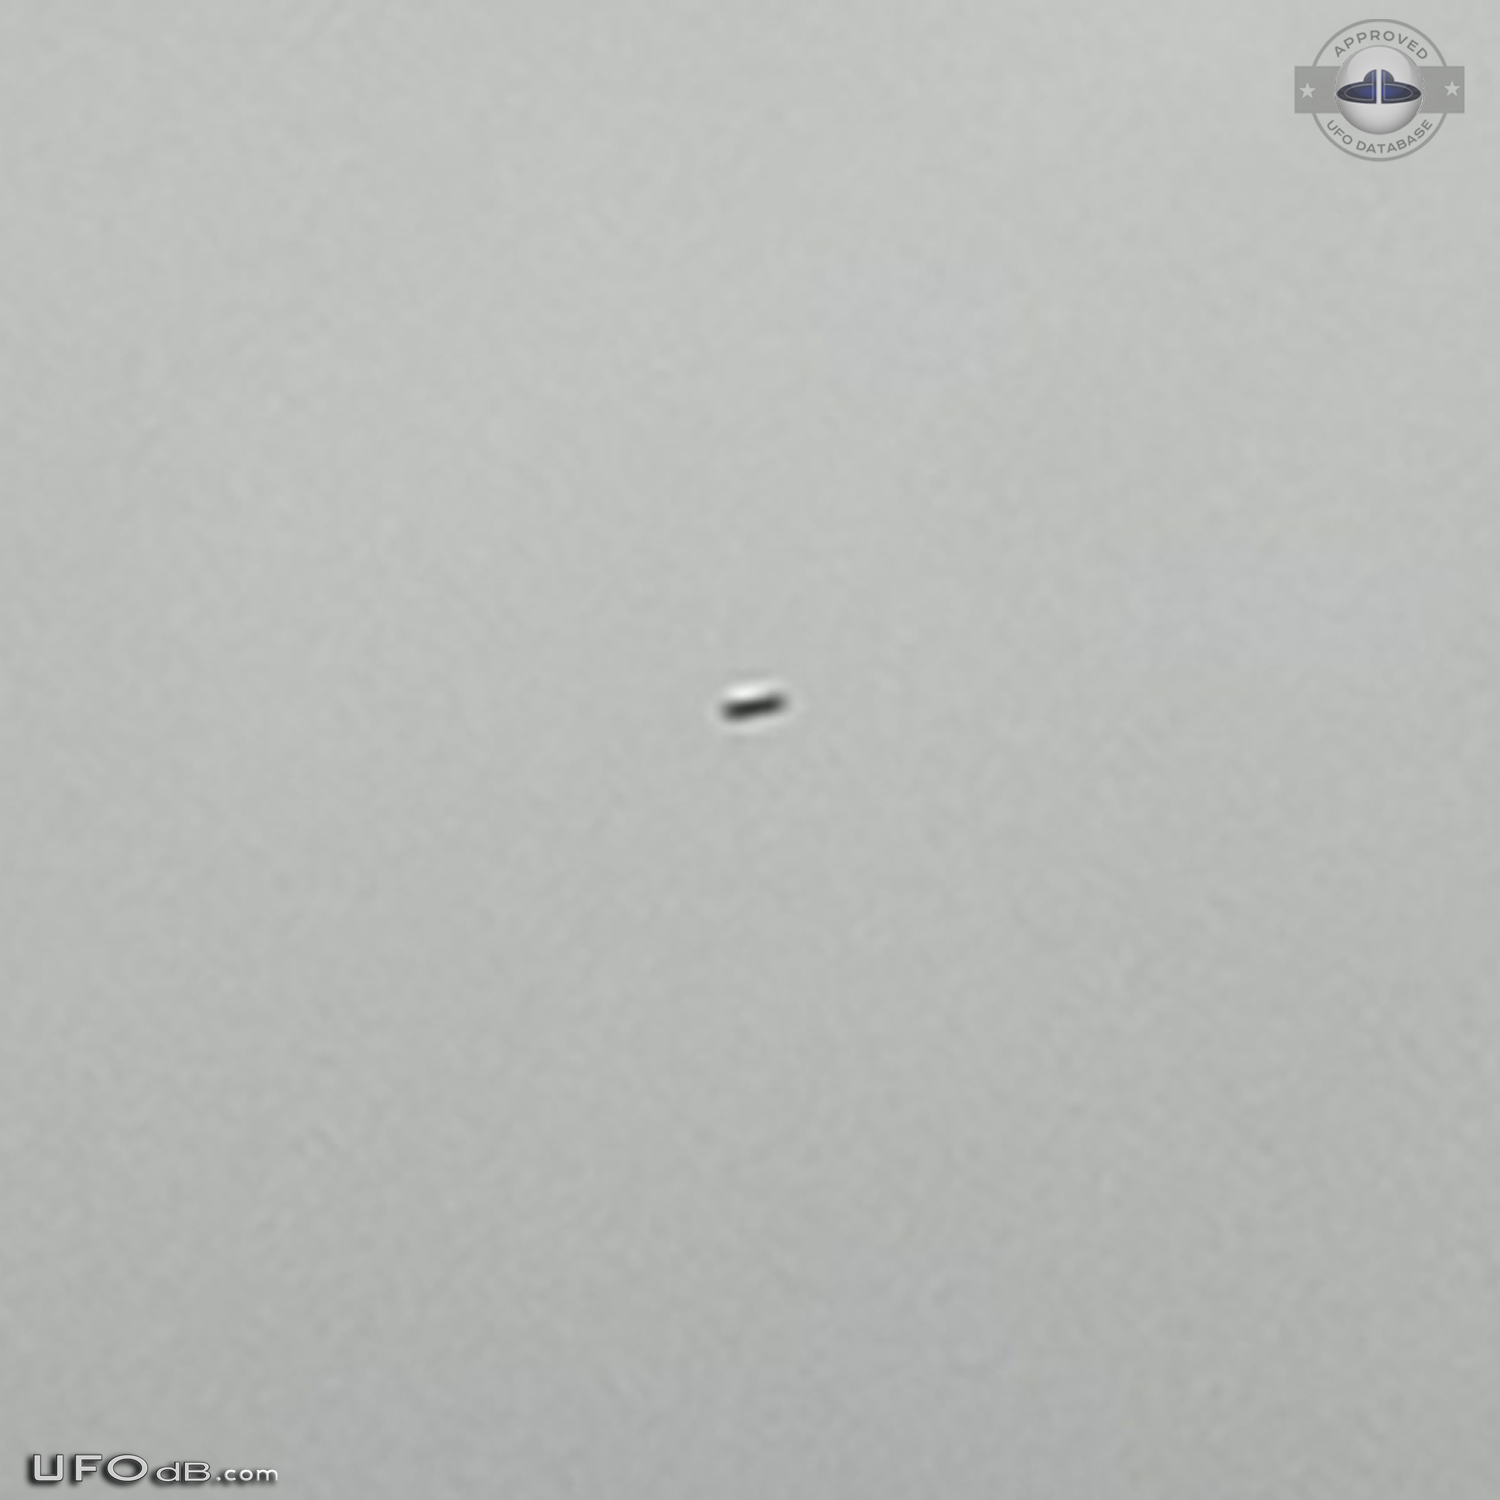 3 disc shaped UFOs seen over Siracusa Sicily Italy january 2014 UFO Picture #599-2